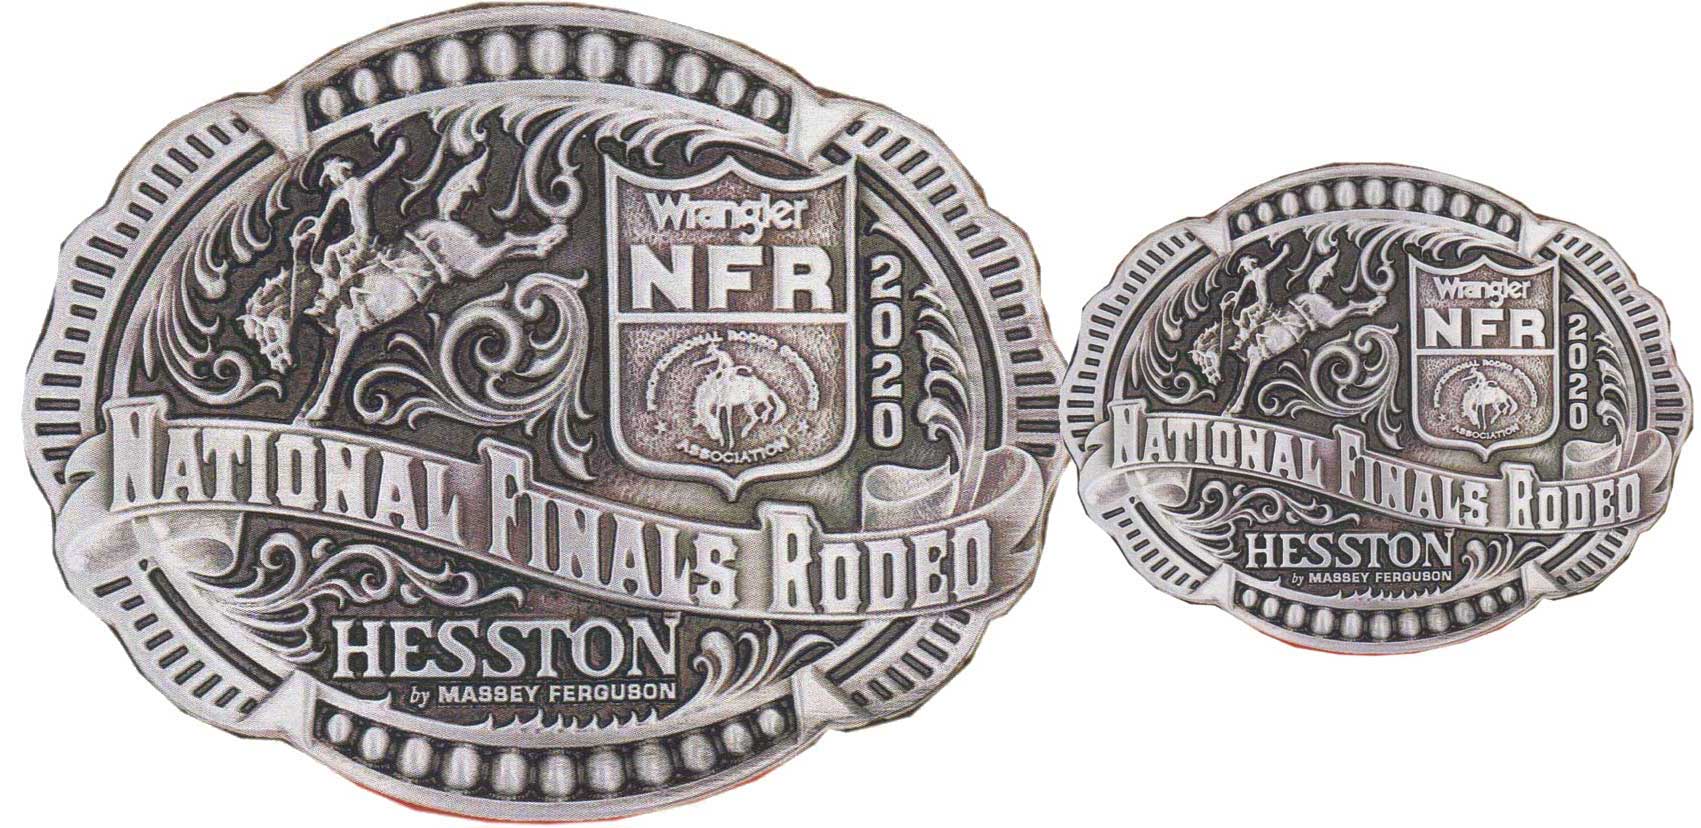 Cowboy Buckle New AGCO PCRA National Finals Rodeo Hesston 2006 NFR Youth Small